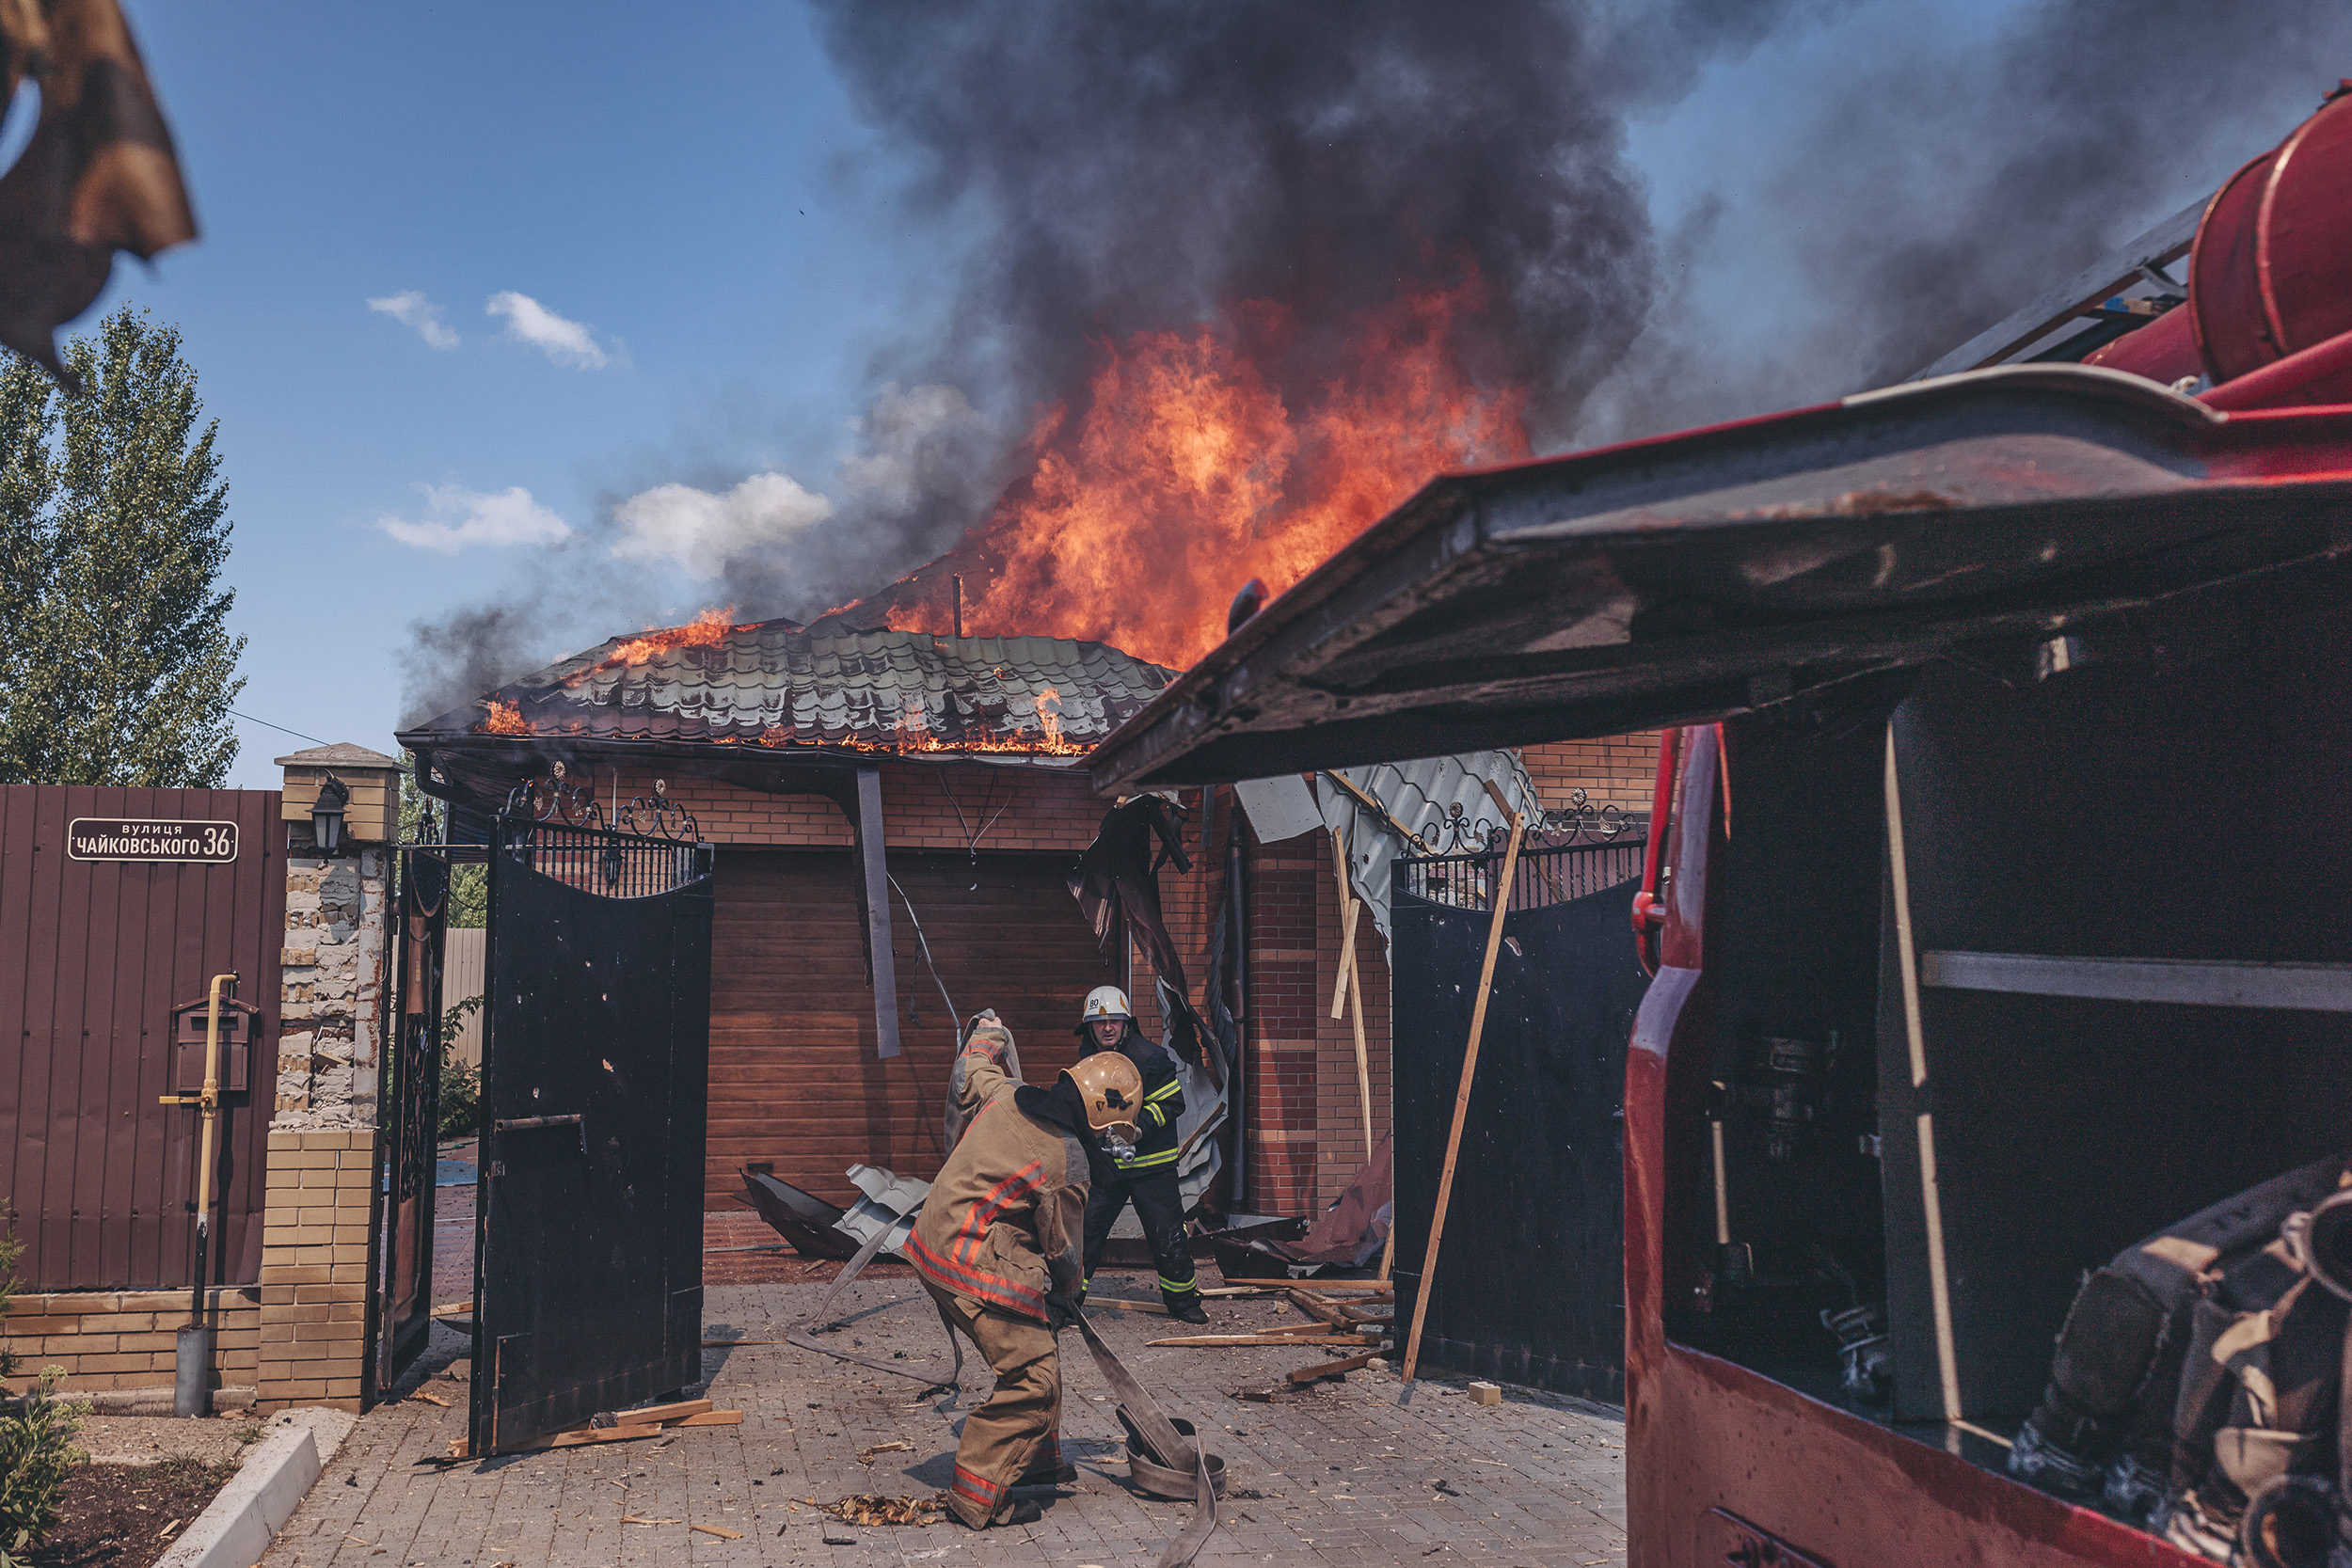 Firefighters try to put out a fire after the Russian shelling of a house in Bakhmut, Ukraine, on July 27.